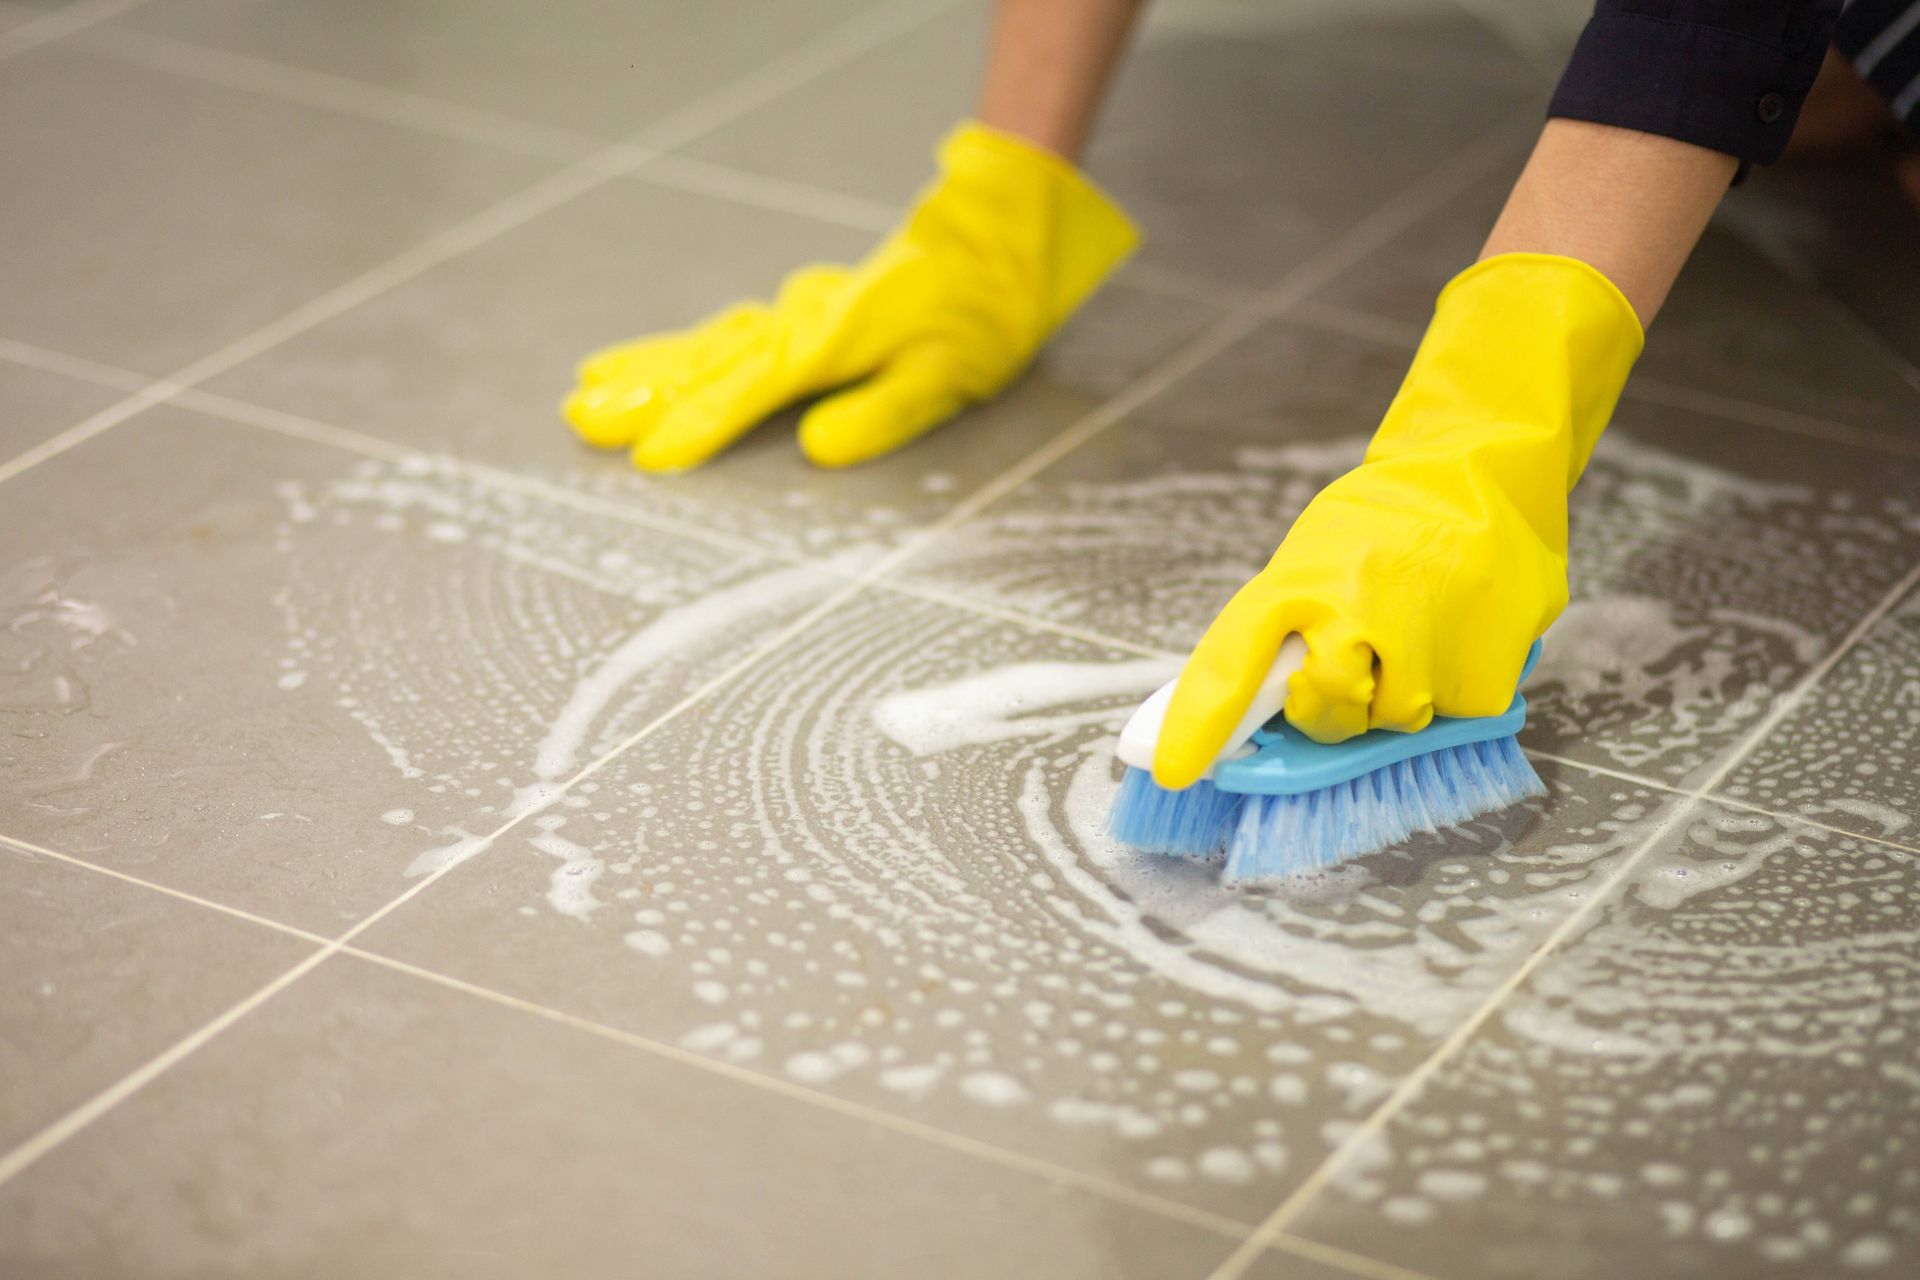 a person wearing yellow gloves is cleaning a tile floor with a brush